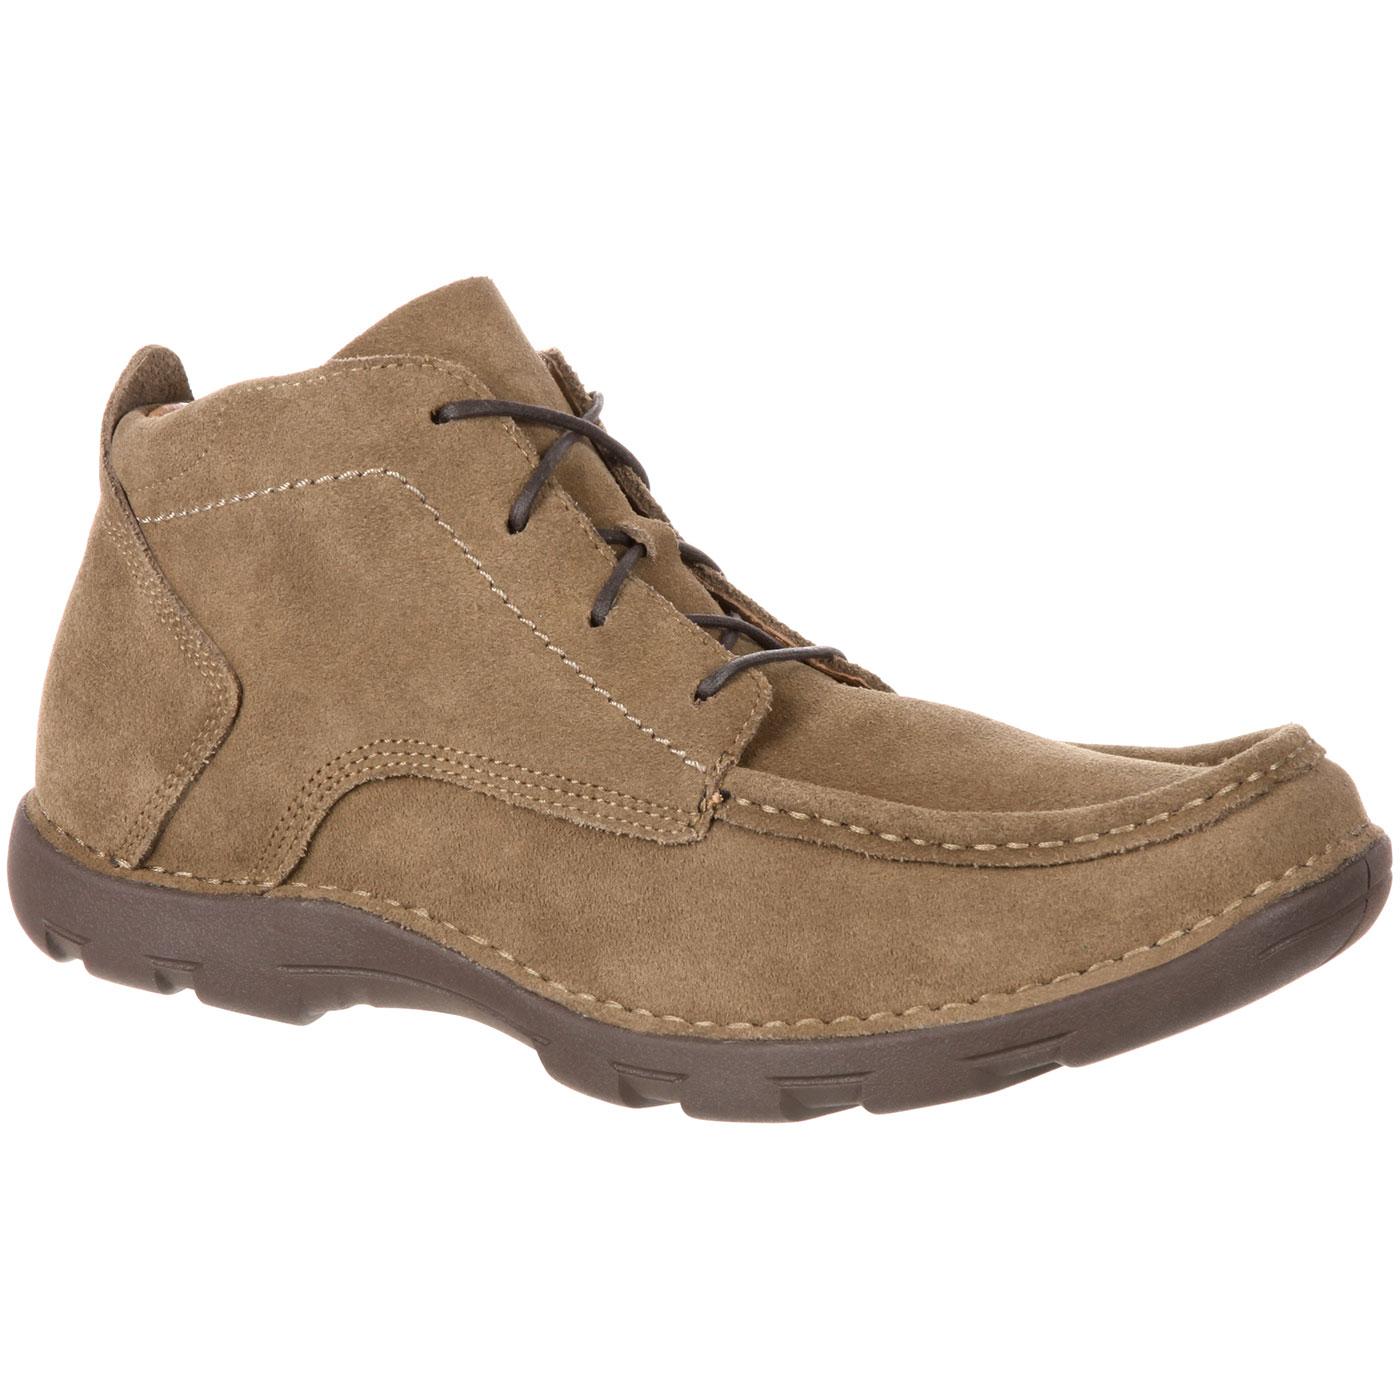 Rocky Cruiser Casual: Men's Brown Leather Western Chukka Boot